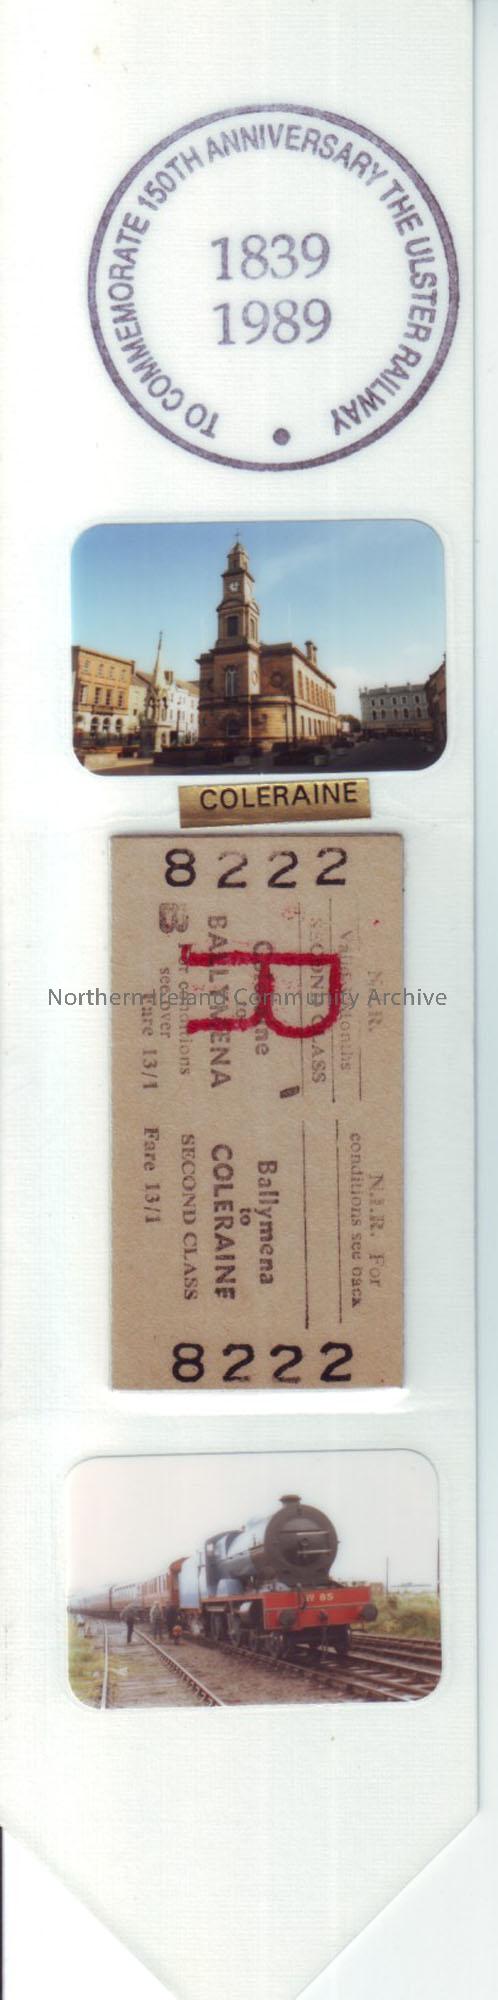 N.I.R return ticket from Coleraine -Ballymena on bookmark commemorating the 150th anniversary of the Ulster Railway. 1839-1989.